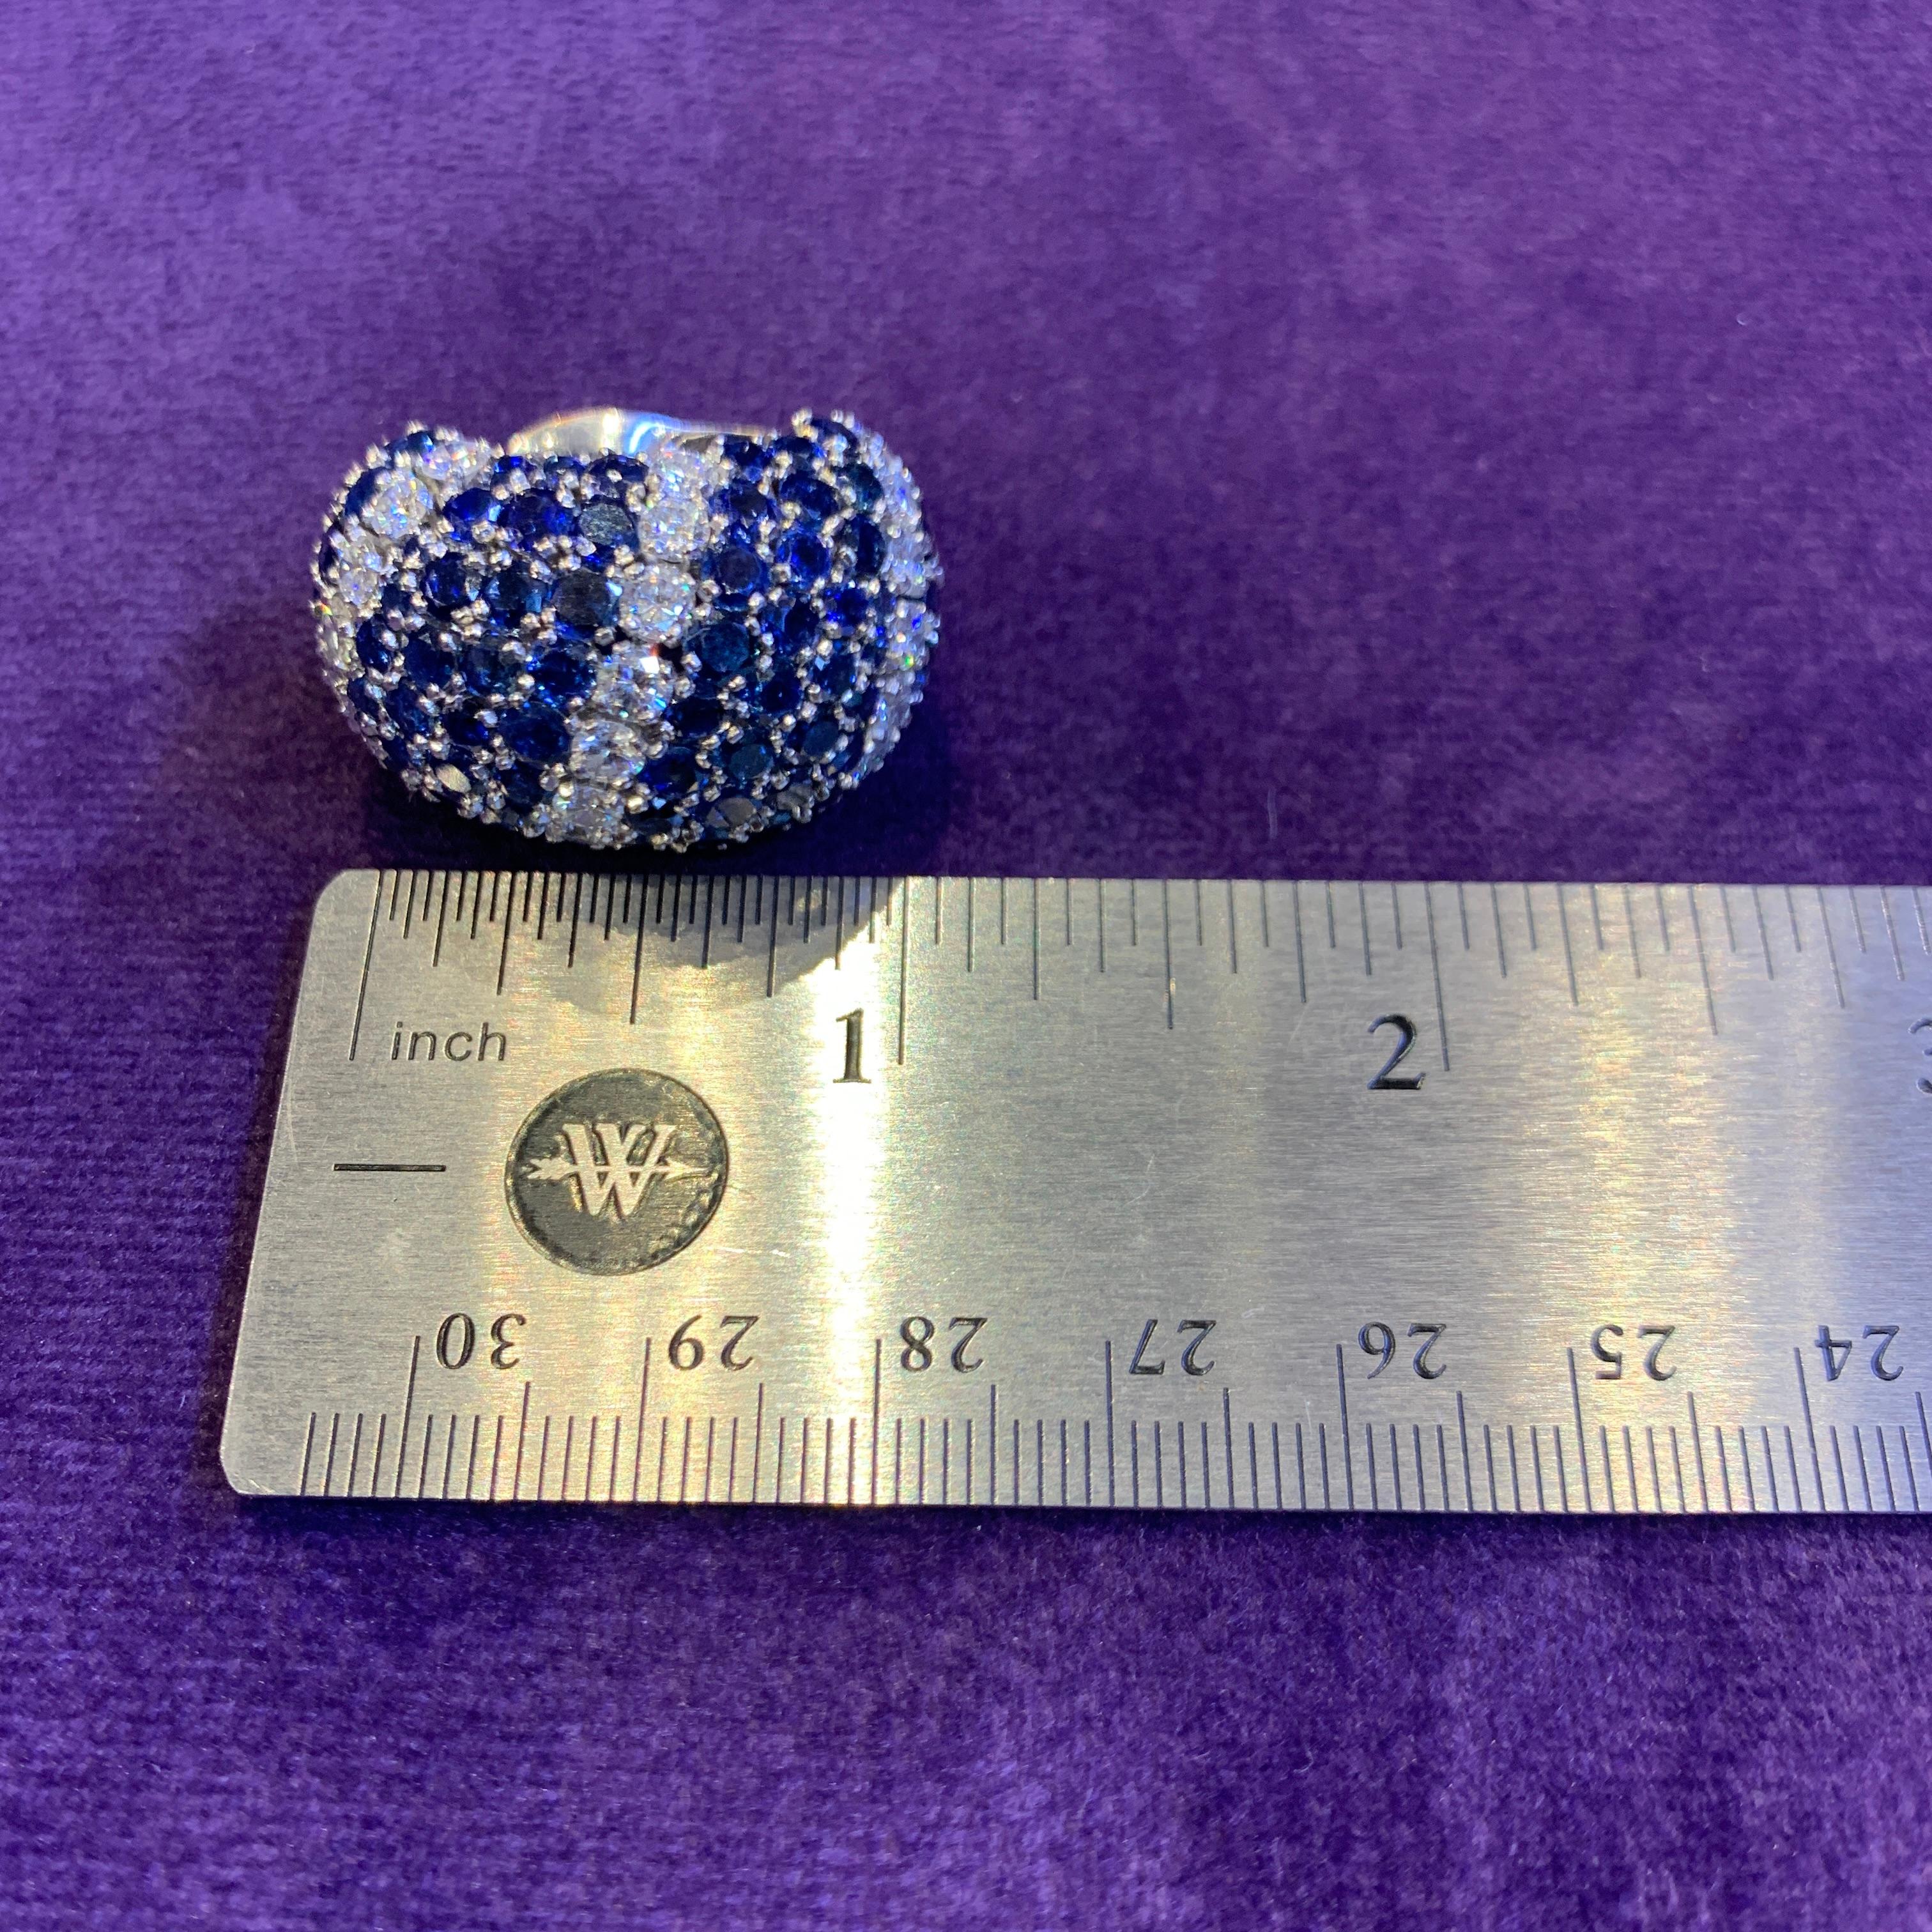 Van Cleef & Arpels Sapphire & Diamond Earrings In Excellent Condition For Sale In New York, NY